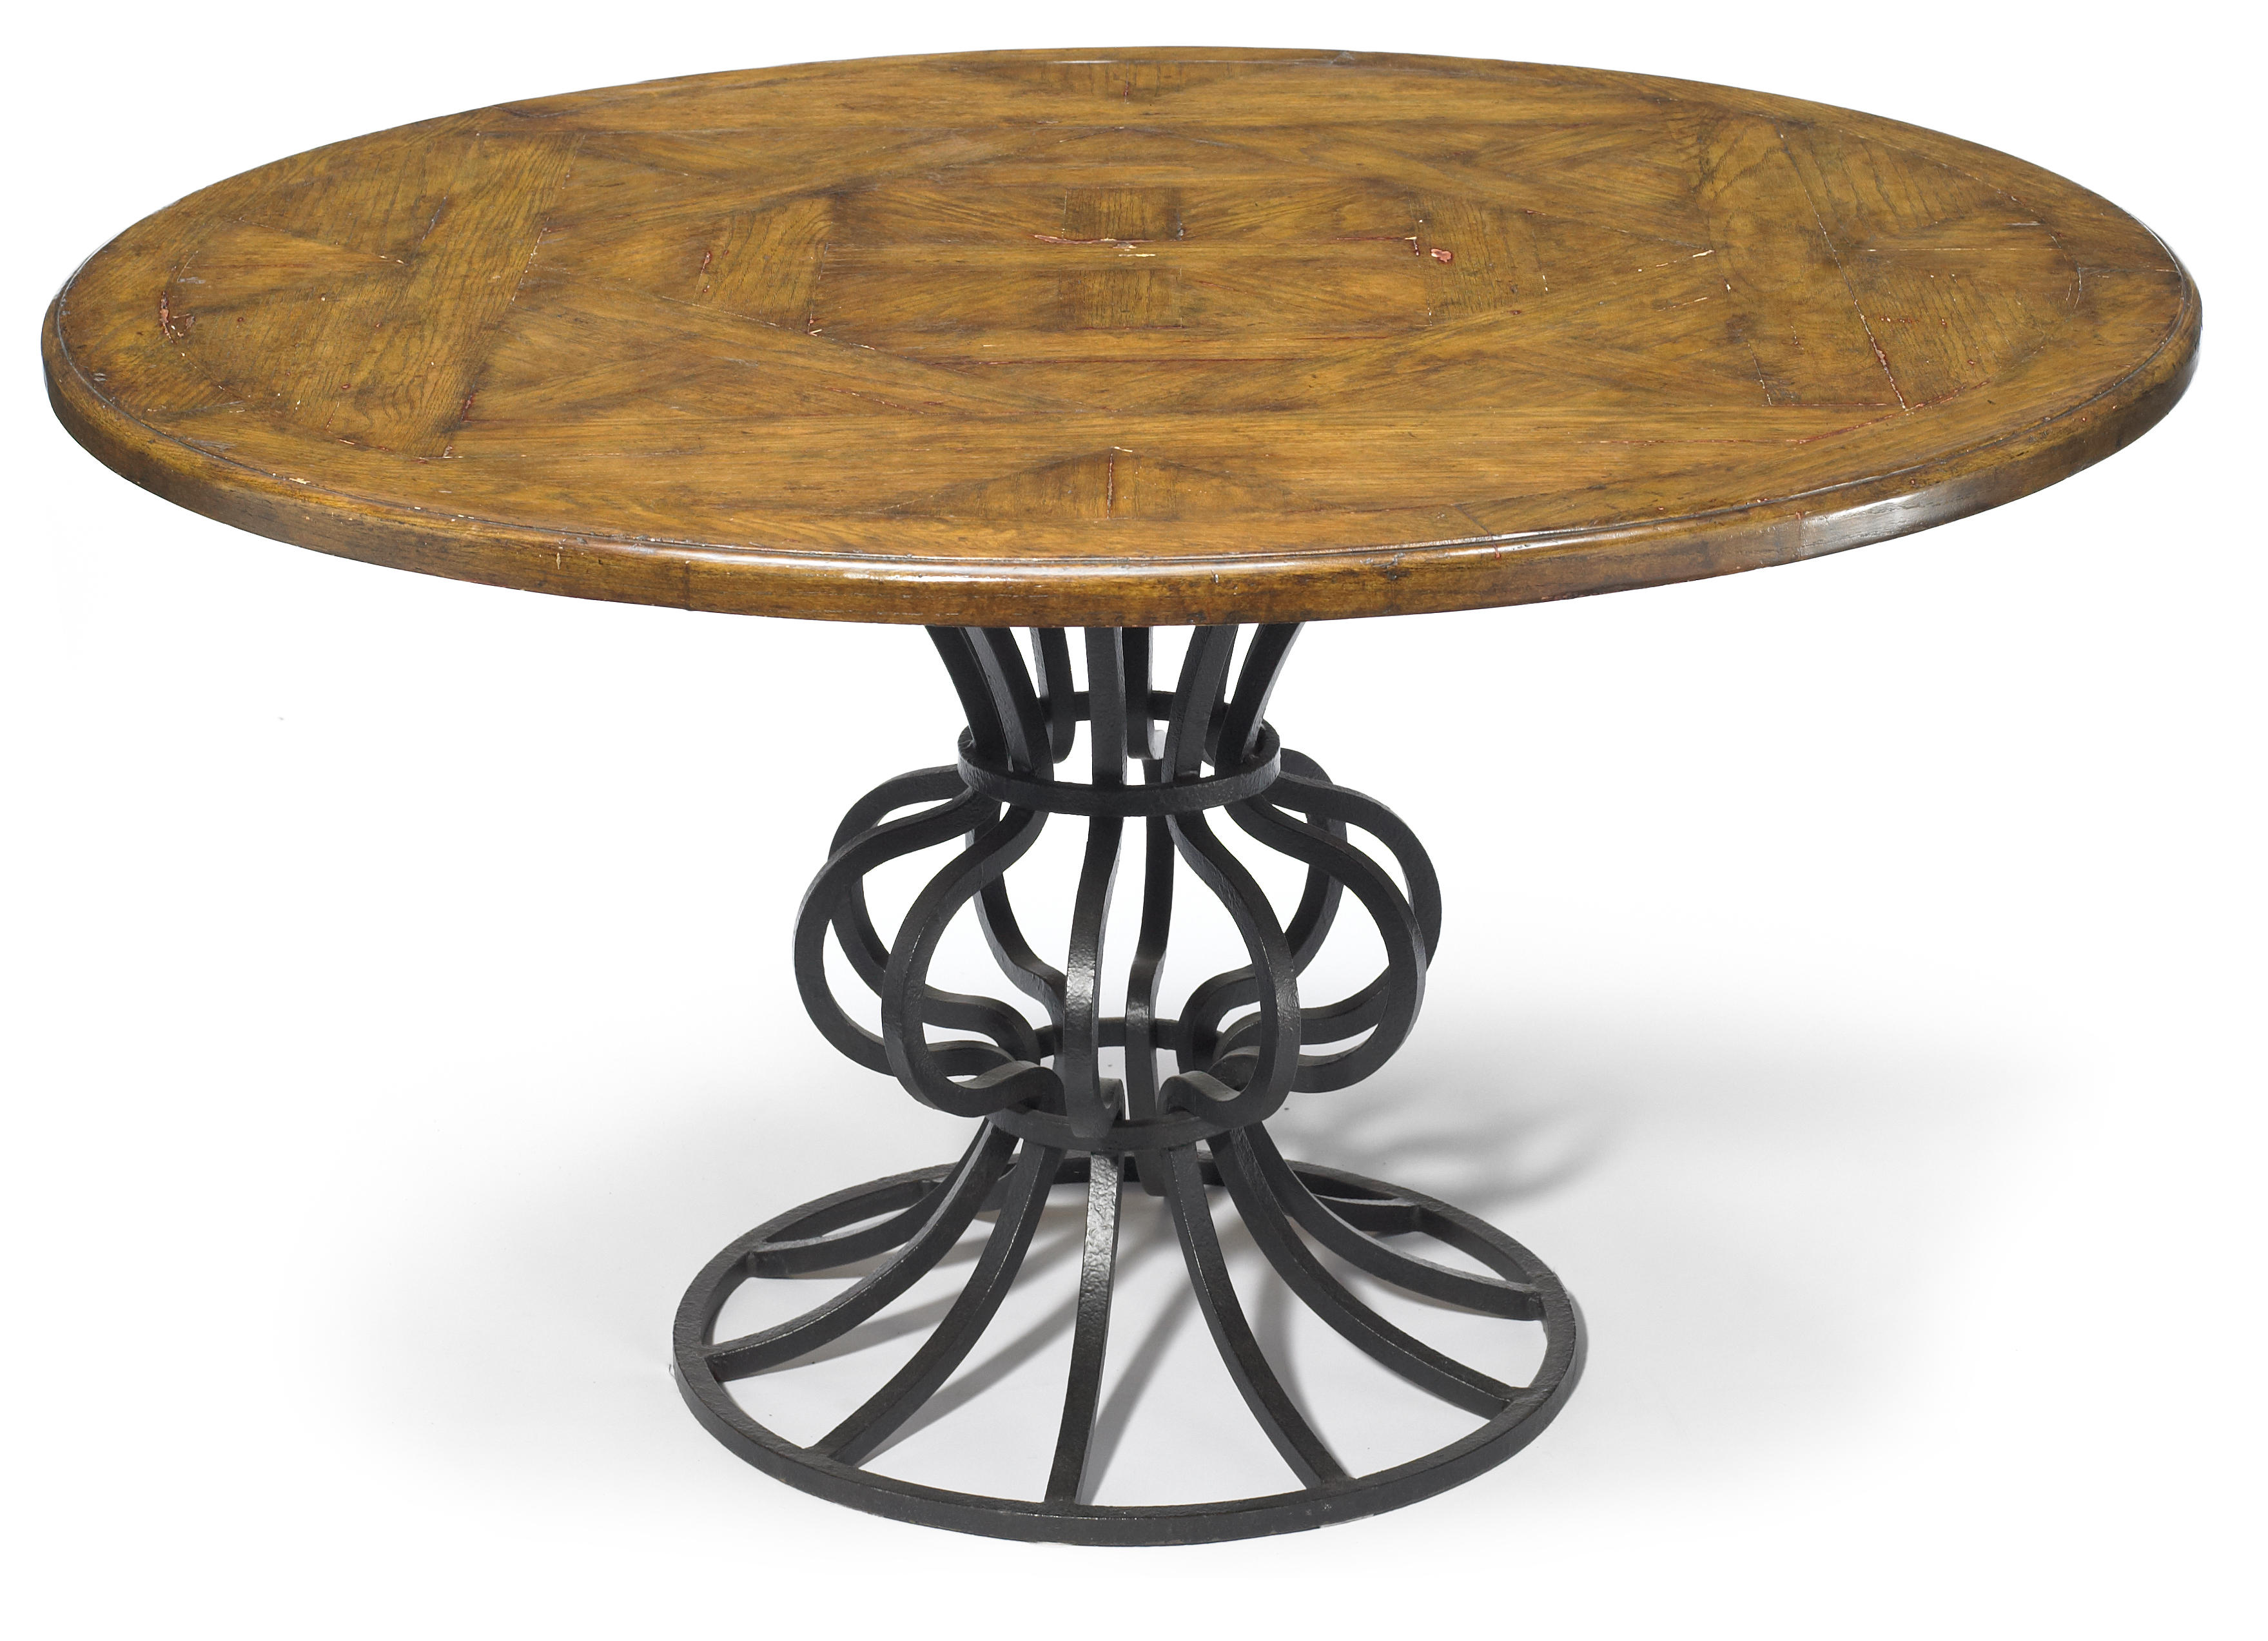 A wrought iron and oak center table 12adef